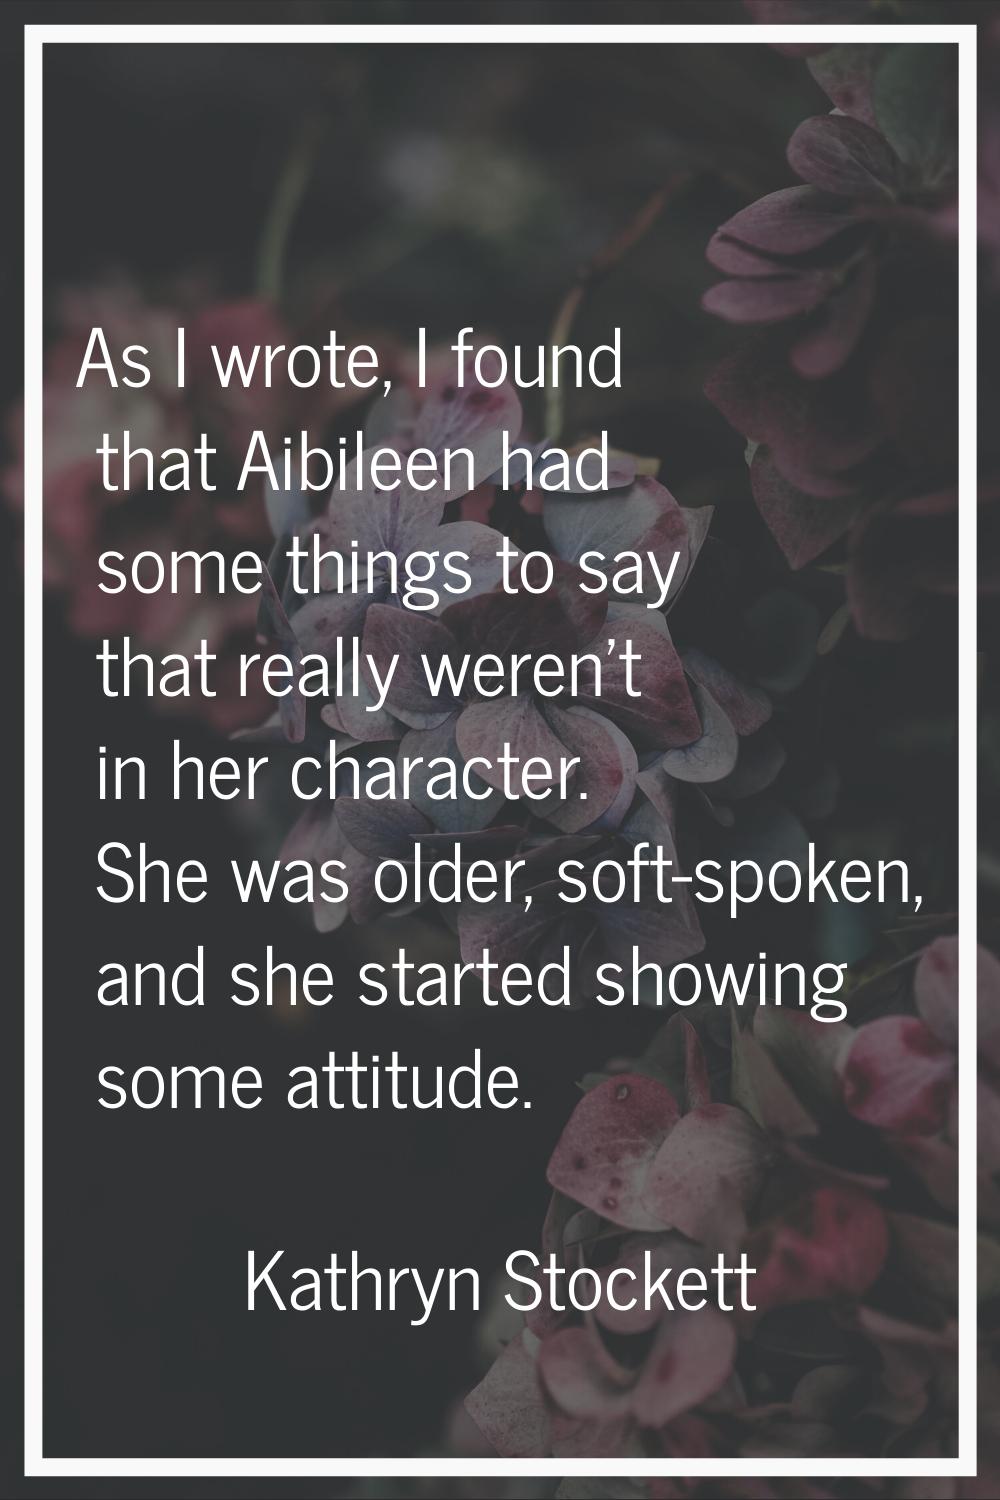 As I wrote, I found that Aibileen had some things to say that really weren't in her character. She 